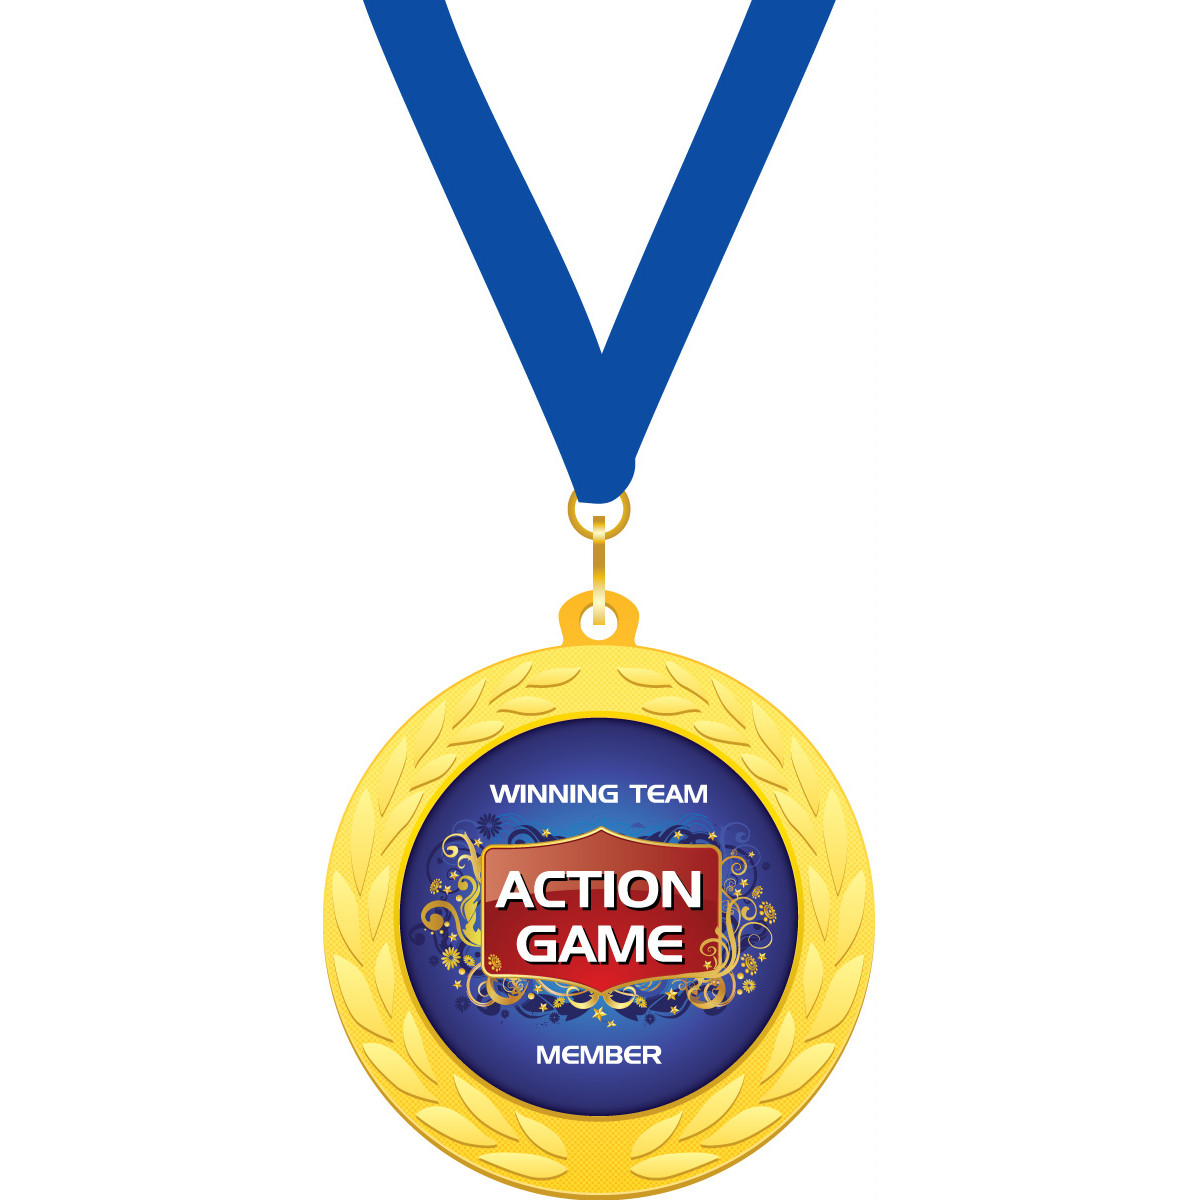 Custom 2 in. Gold Medallion with Blue Neck Ribbon (Action Game - Winning Team)